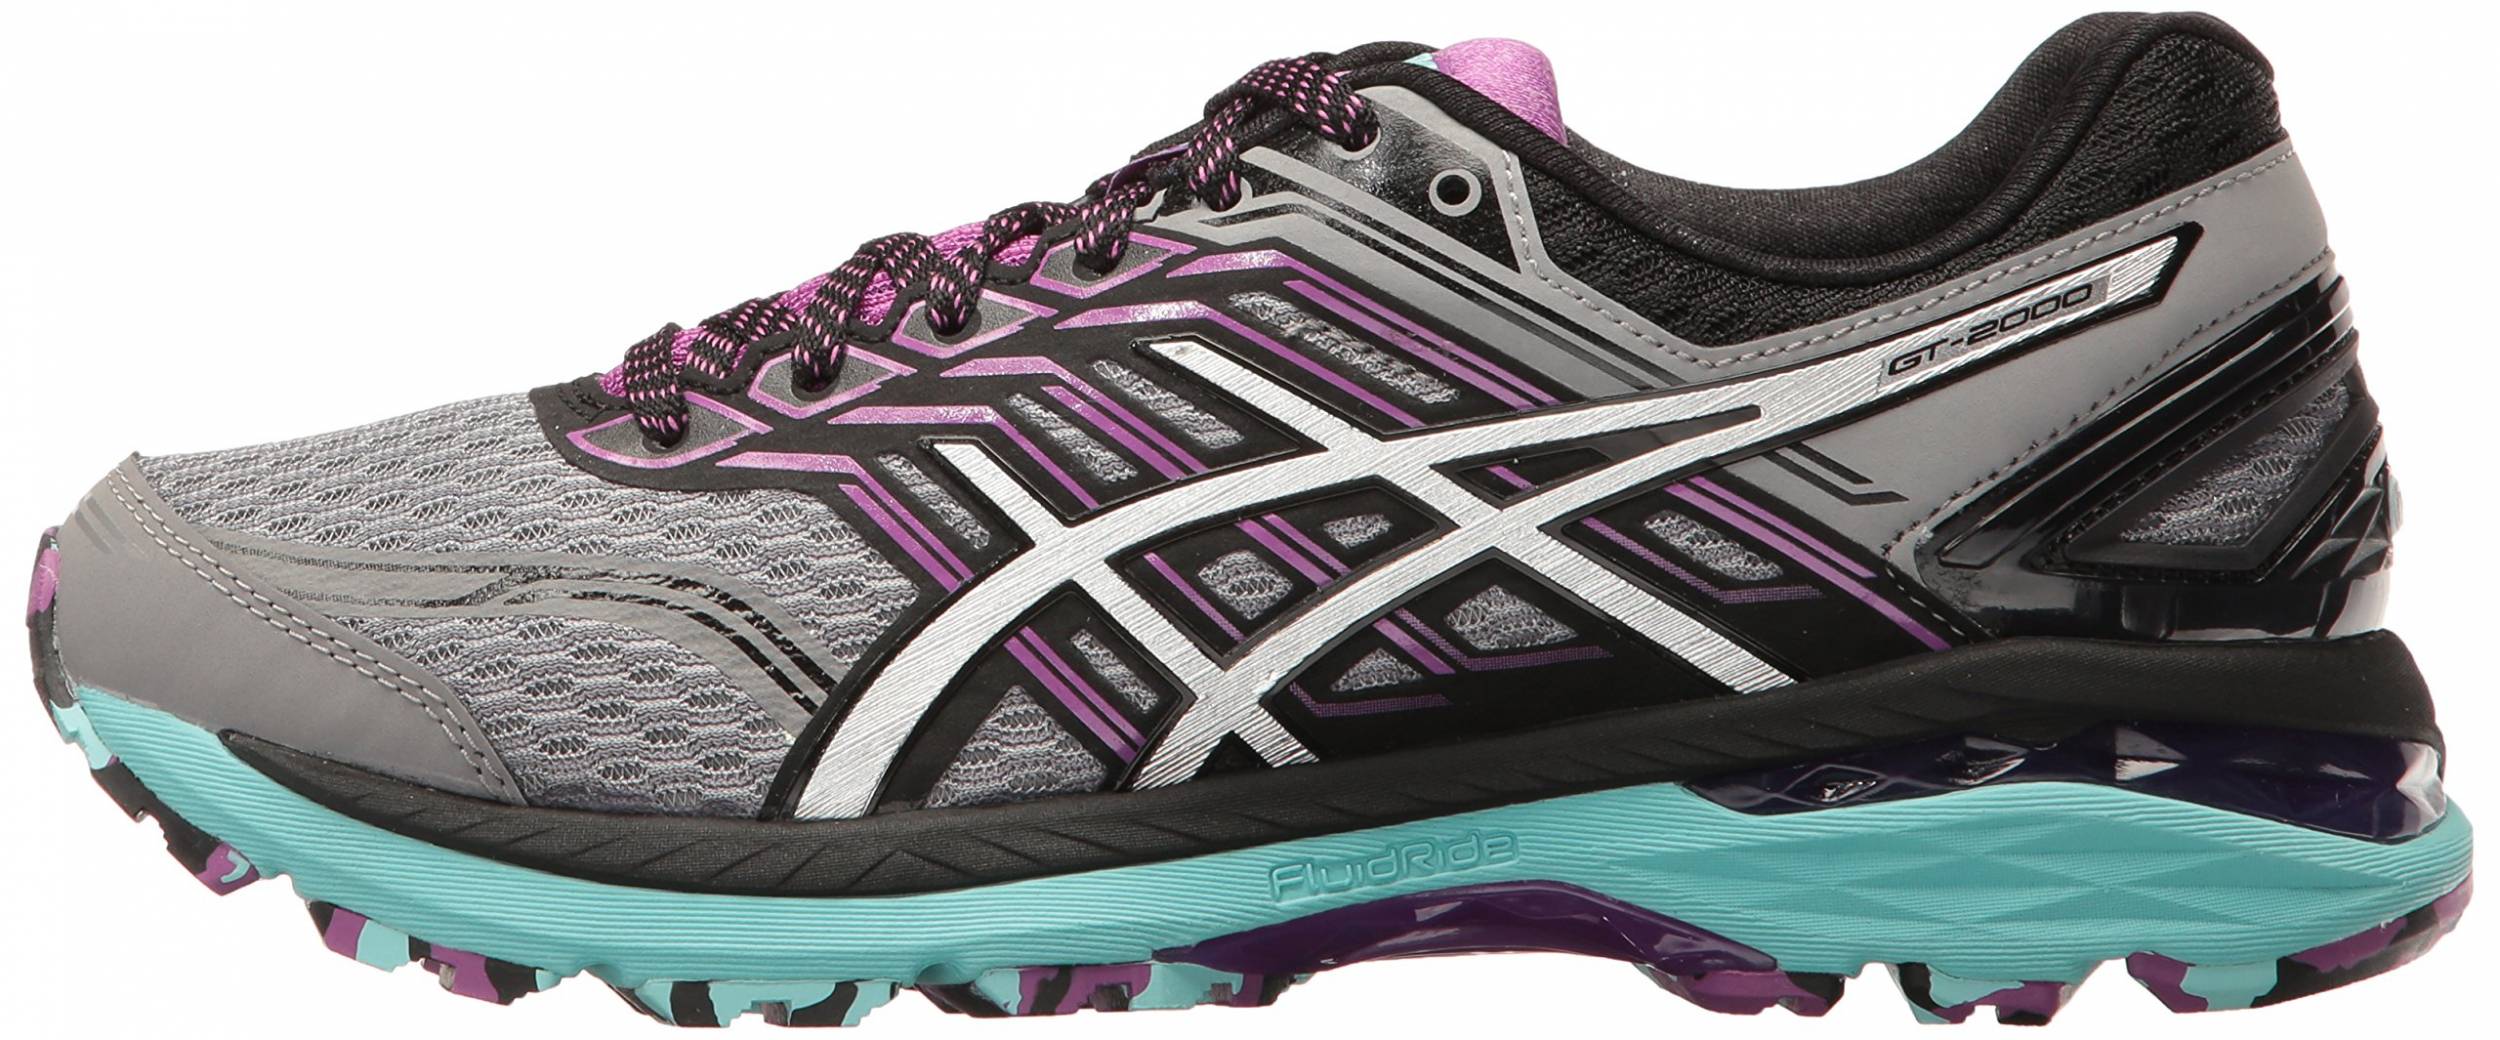 $120 + Review of Asics GT 2000 5 Trail 